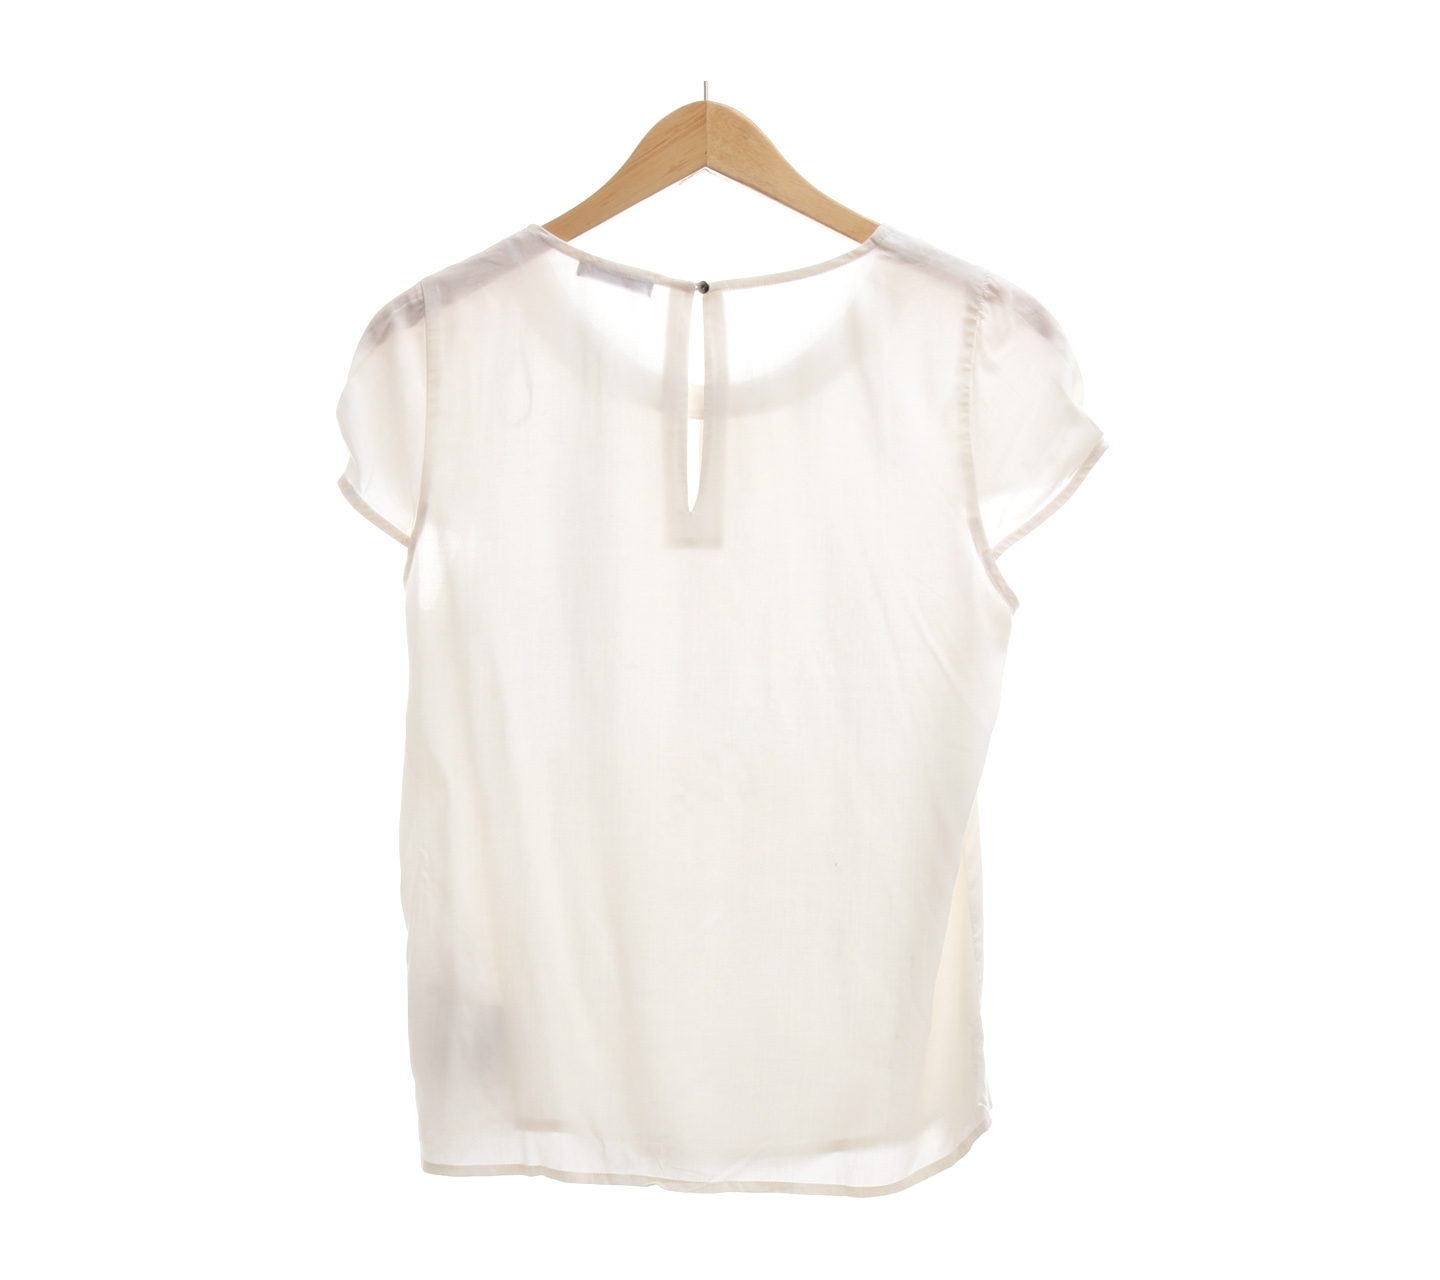 Hush Puppies Off White Blouse 